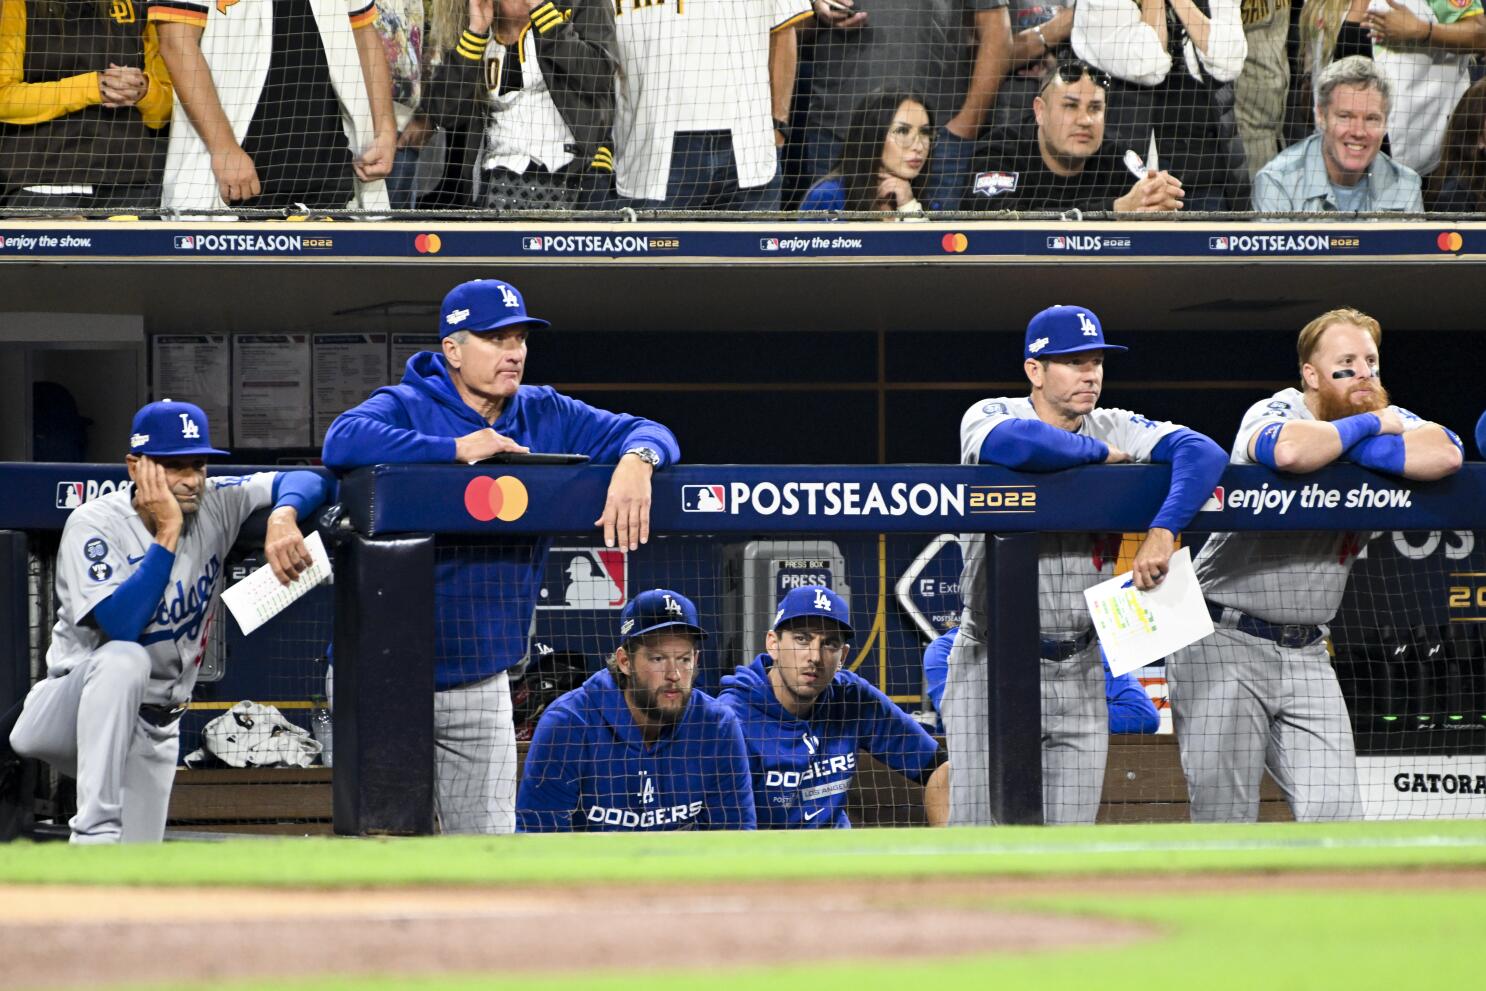 Dodgers' postseason failures, ranked: Every playoff exit since 2013